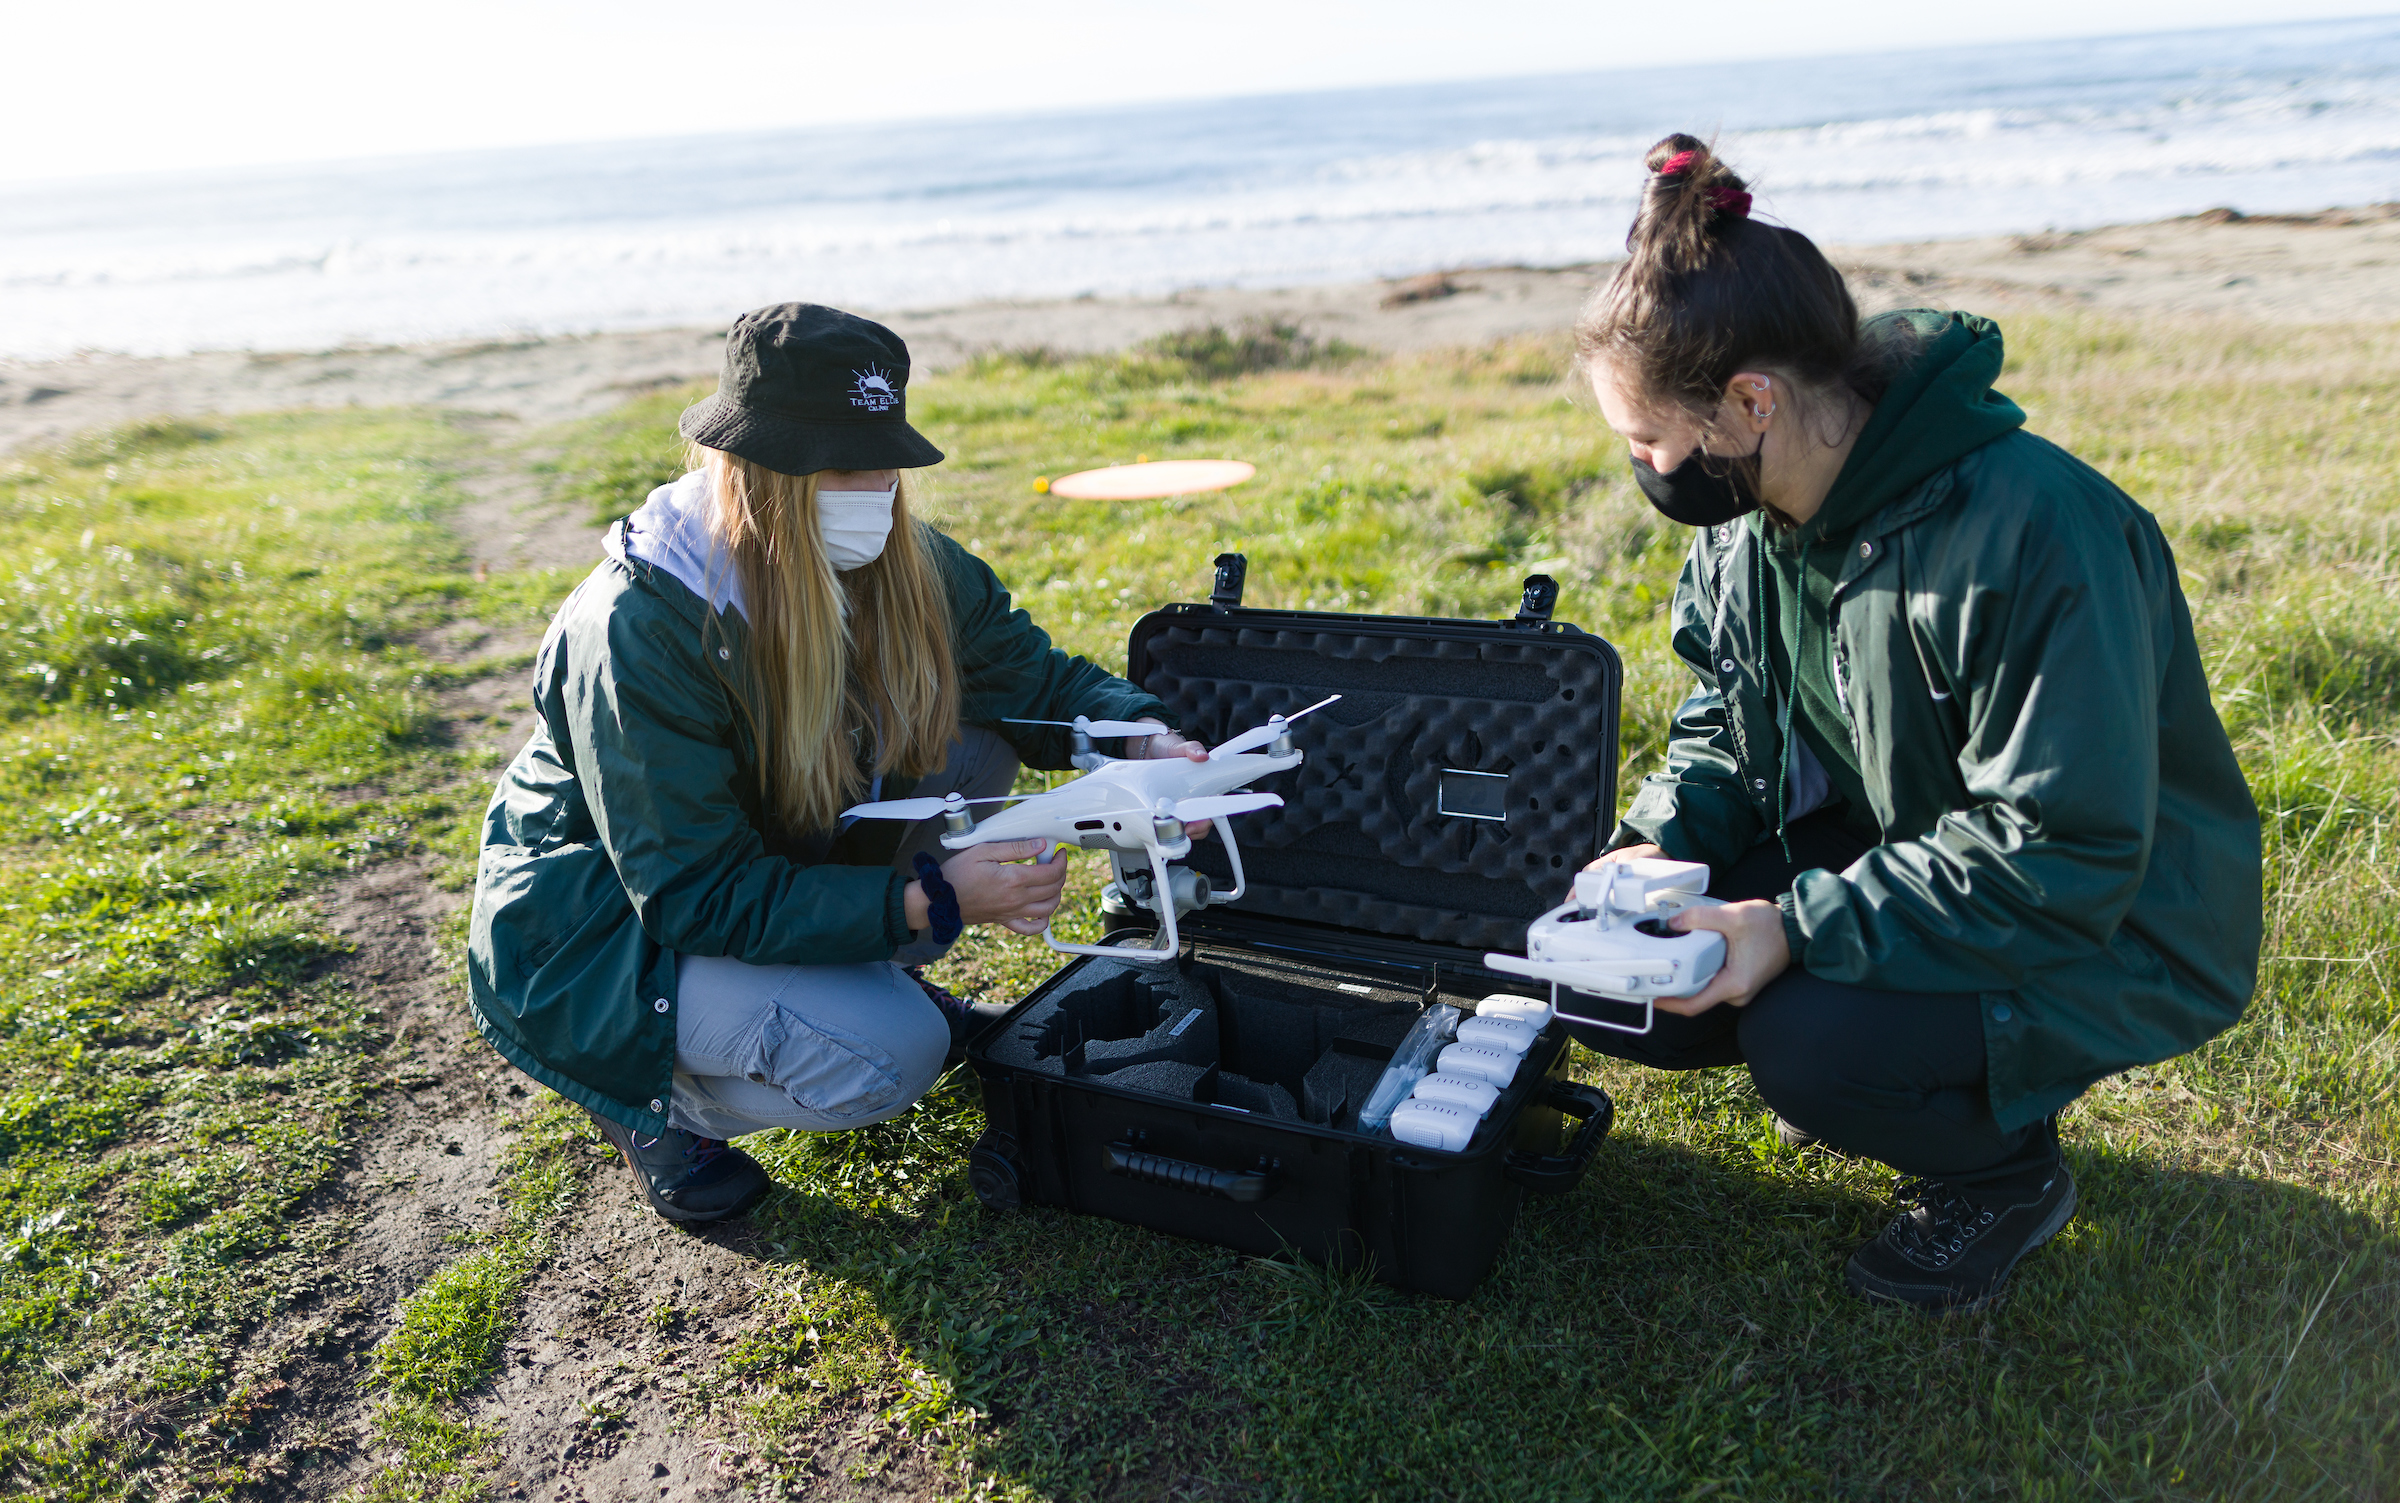 Graduate students Kate Riordan and Molly Murphy start setting up the aerial drone for surveys. NMFS permit #22187-02